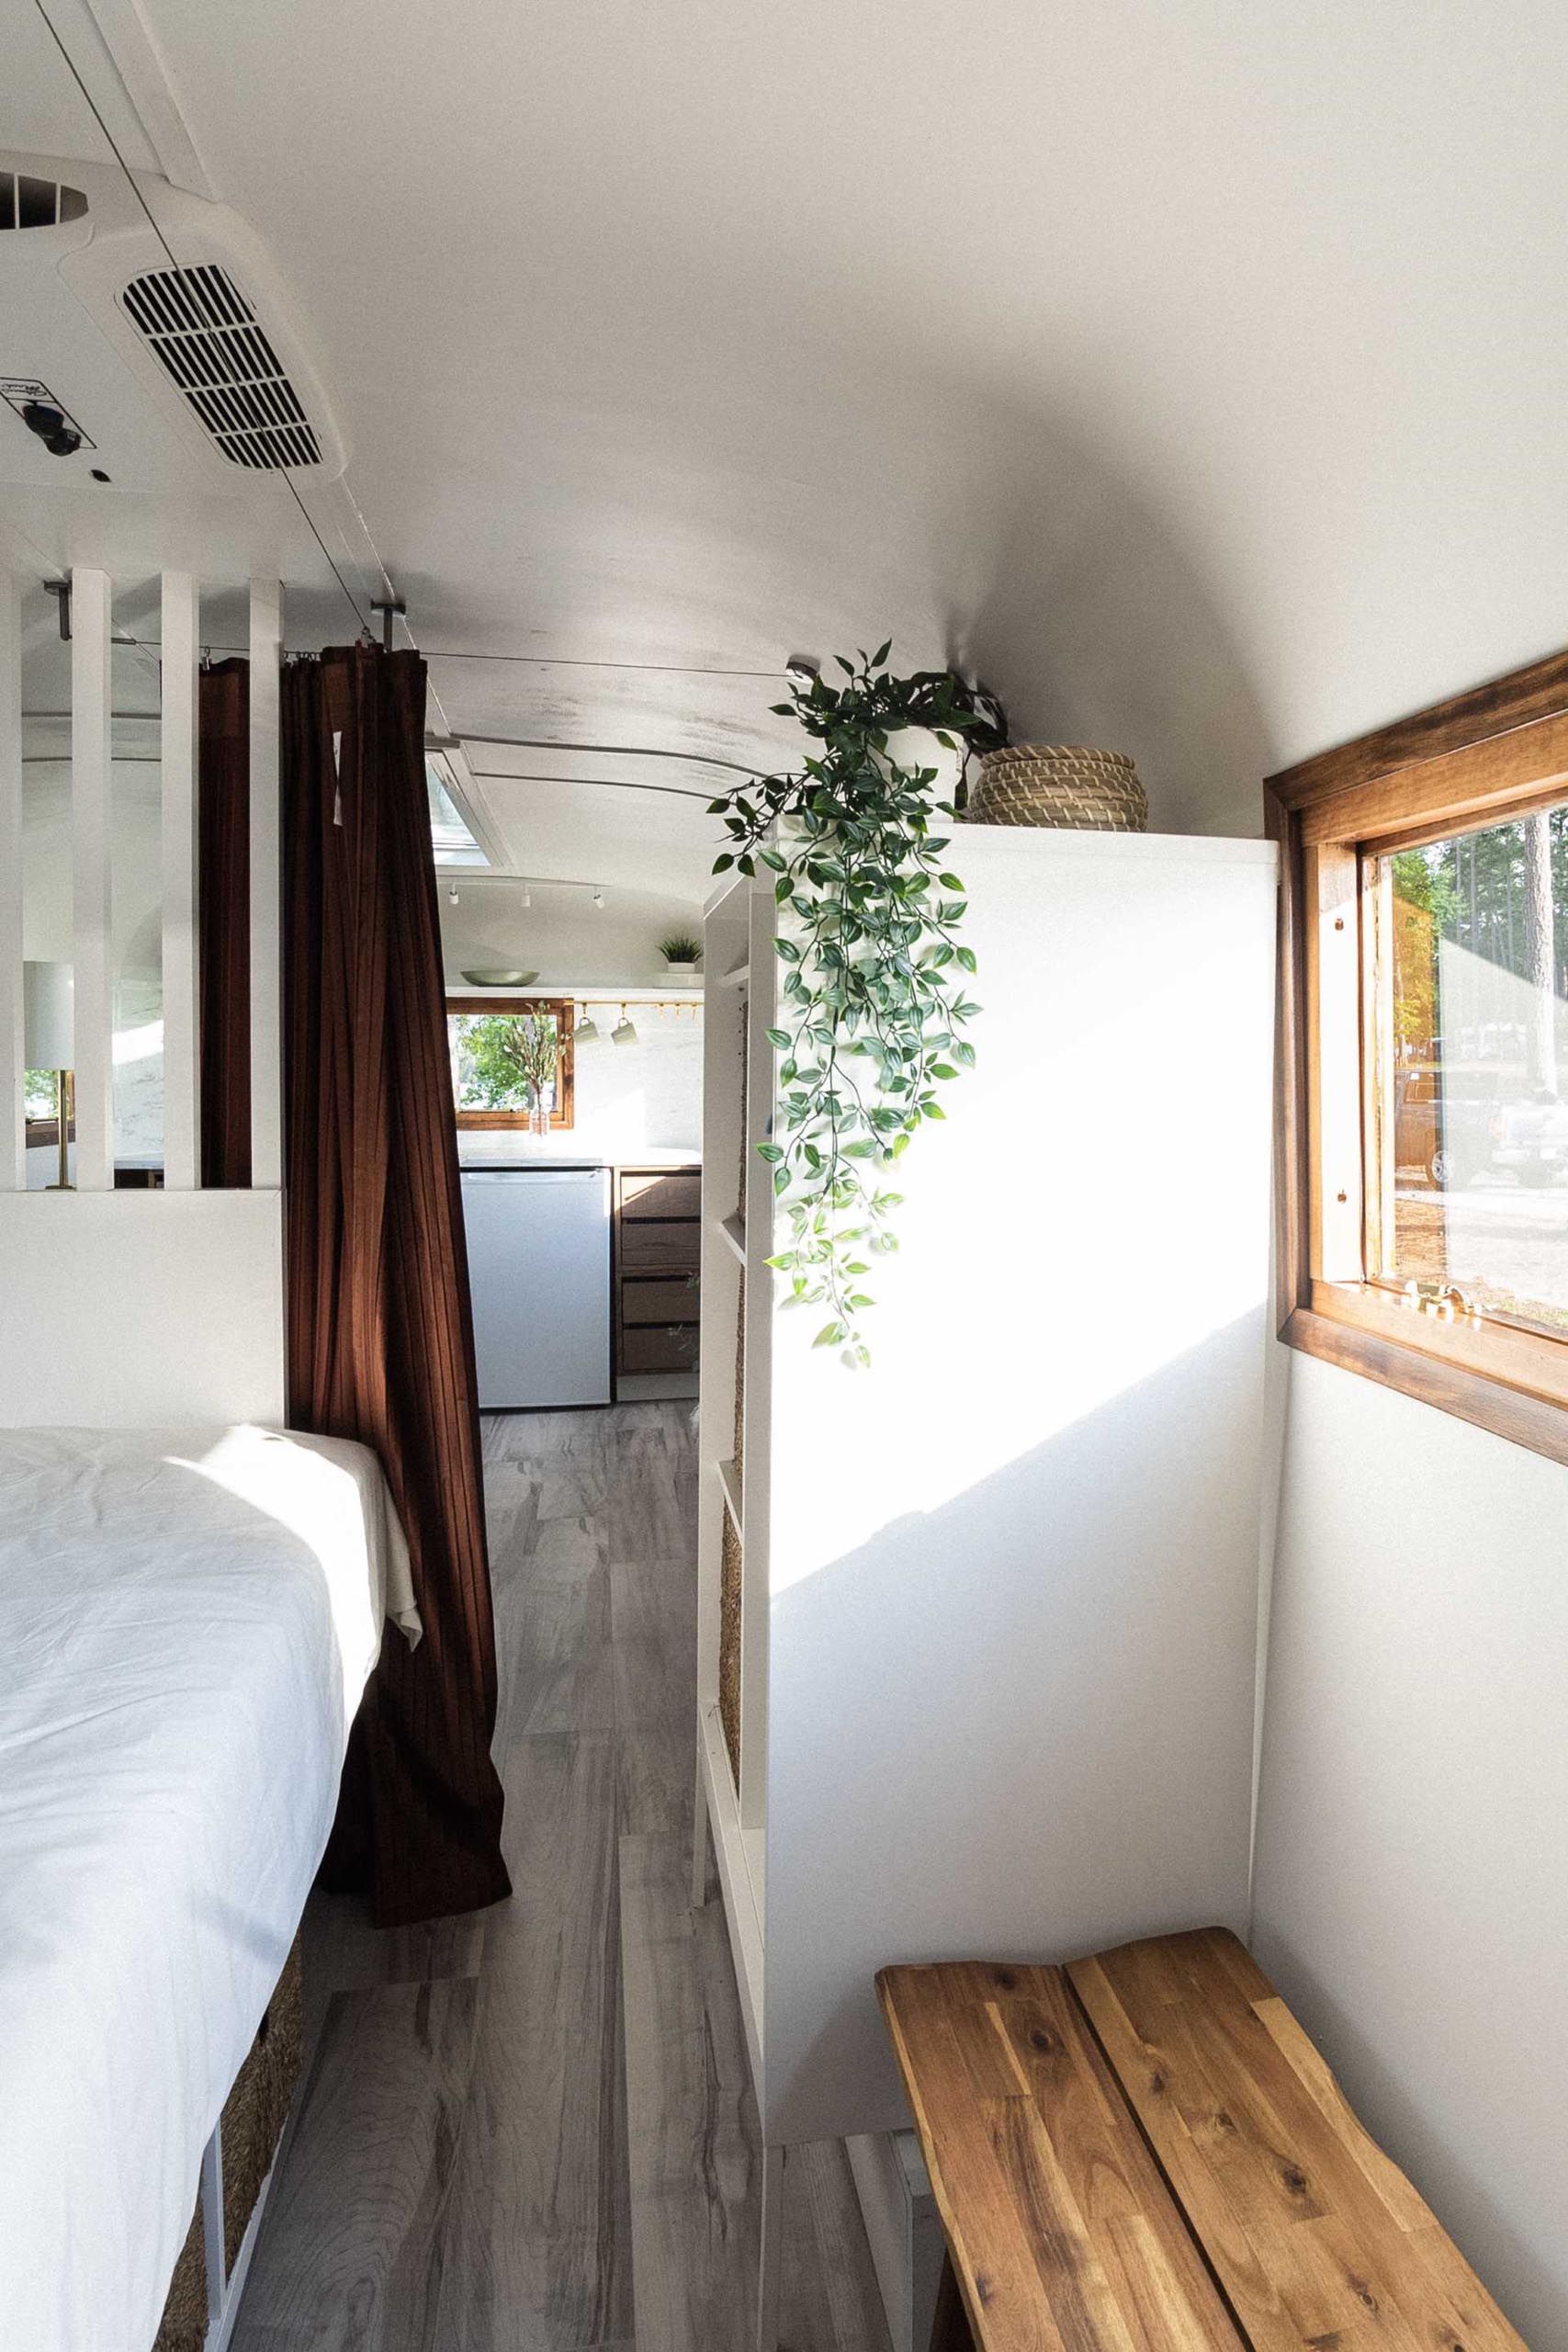 A renovated vintage travel trailer includes a raised bed with storage underneath and built-in bookshelves.